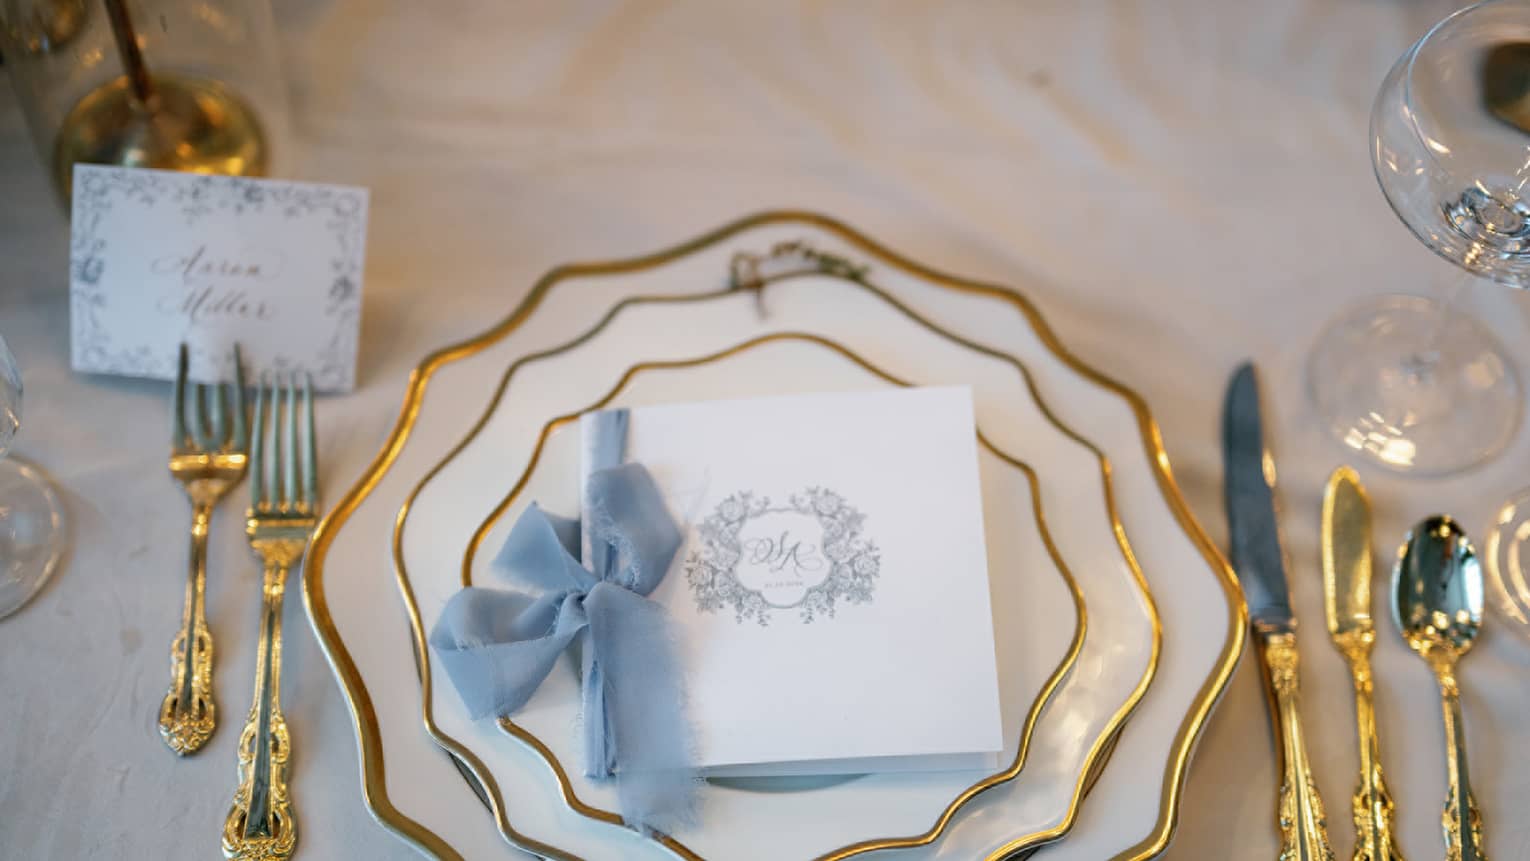 Gold and white plates with gold utensils and wedding card.